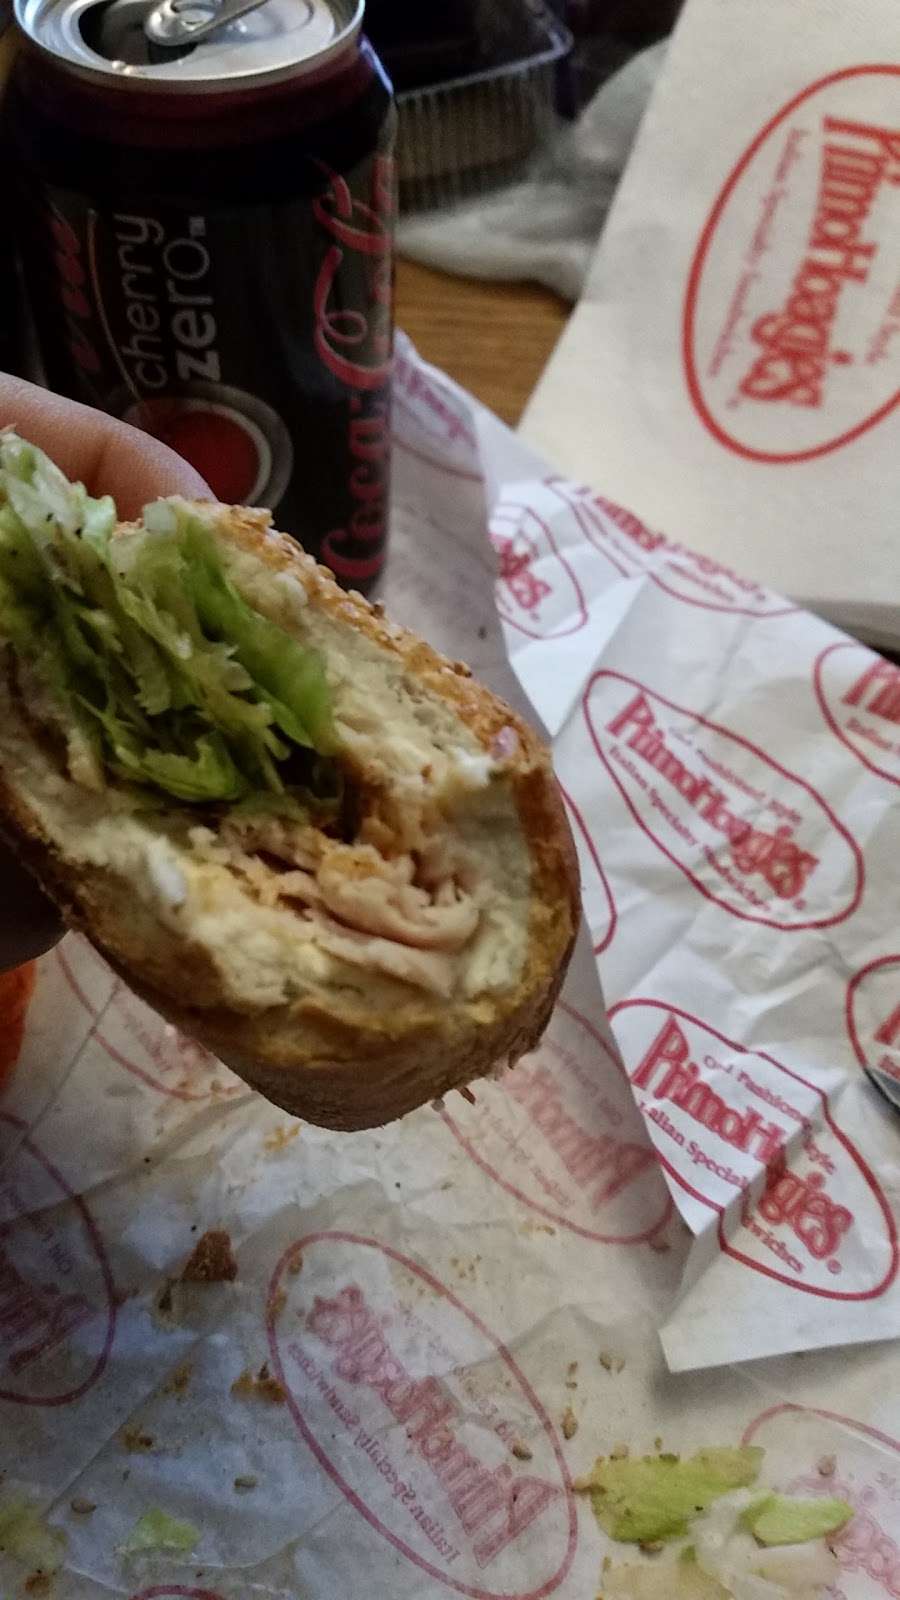 Primo Hoagies | 210 Pennbrook Pkwy, Lansdale, PA 19446 | Phone: (215) 361-2490